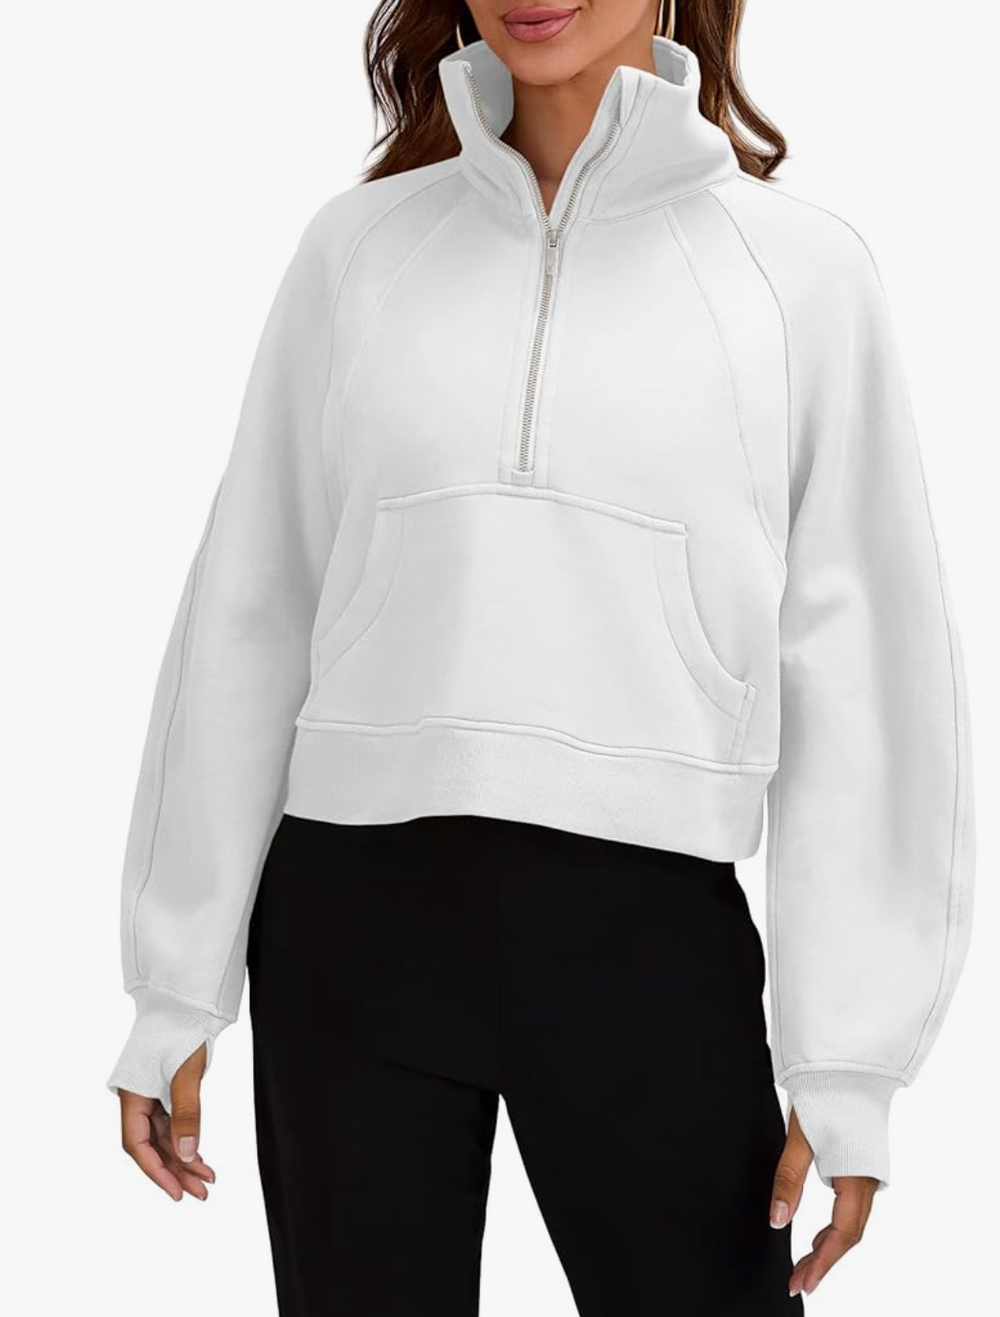 Lululemon scuba hoodie target dupe! Run now this jacket is amazing! #l